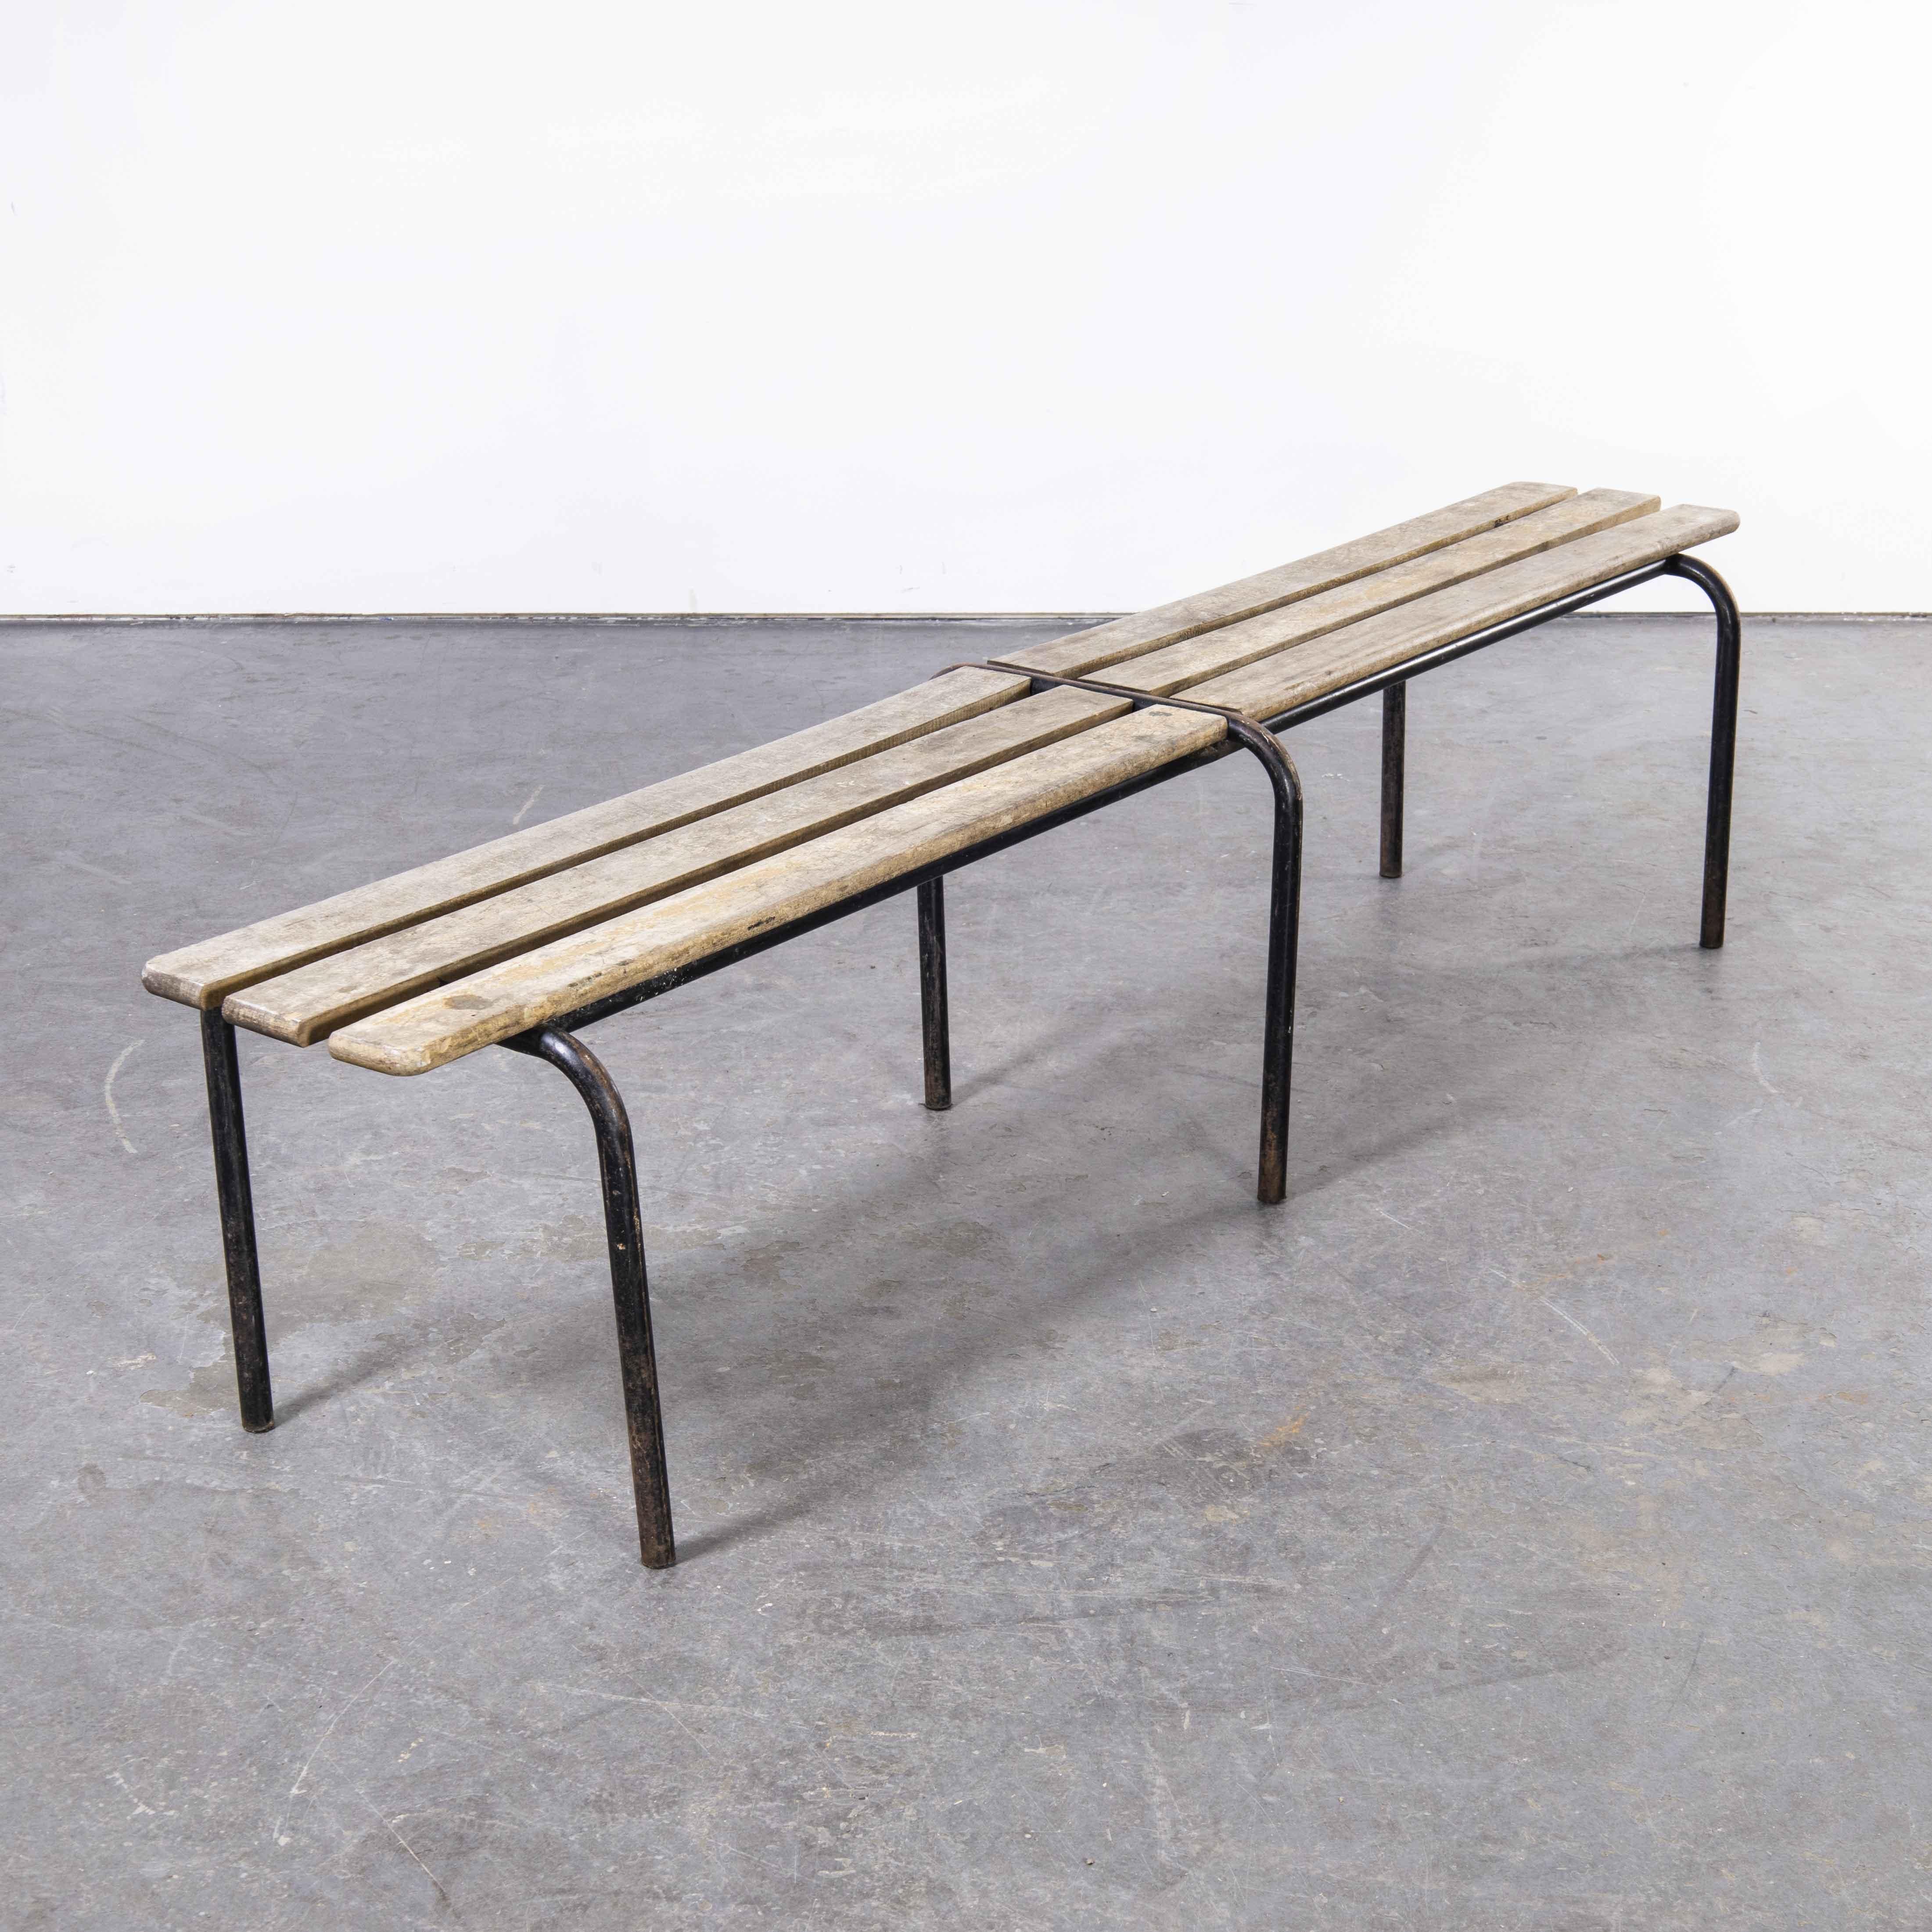 1940’s original French Mullca long slatted bench (Model 681)

1940’s original French Mullca long slatted bench (Model 681). One of our most favourite makers, in 1947 Robert Muller and Gaston Cavaillon created the company Mullca that went on to